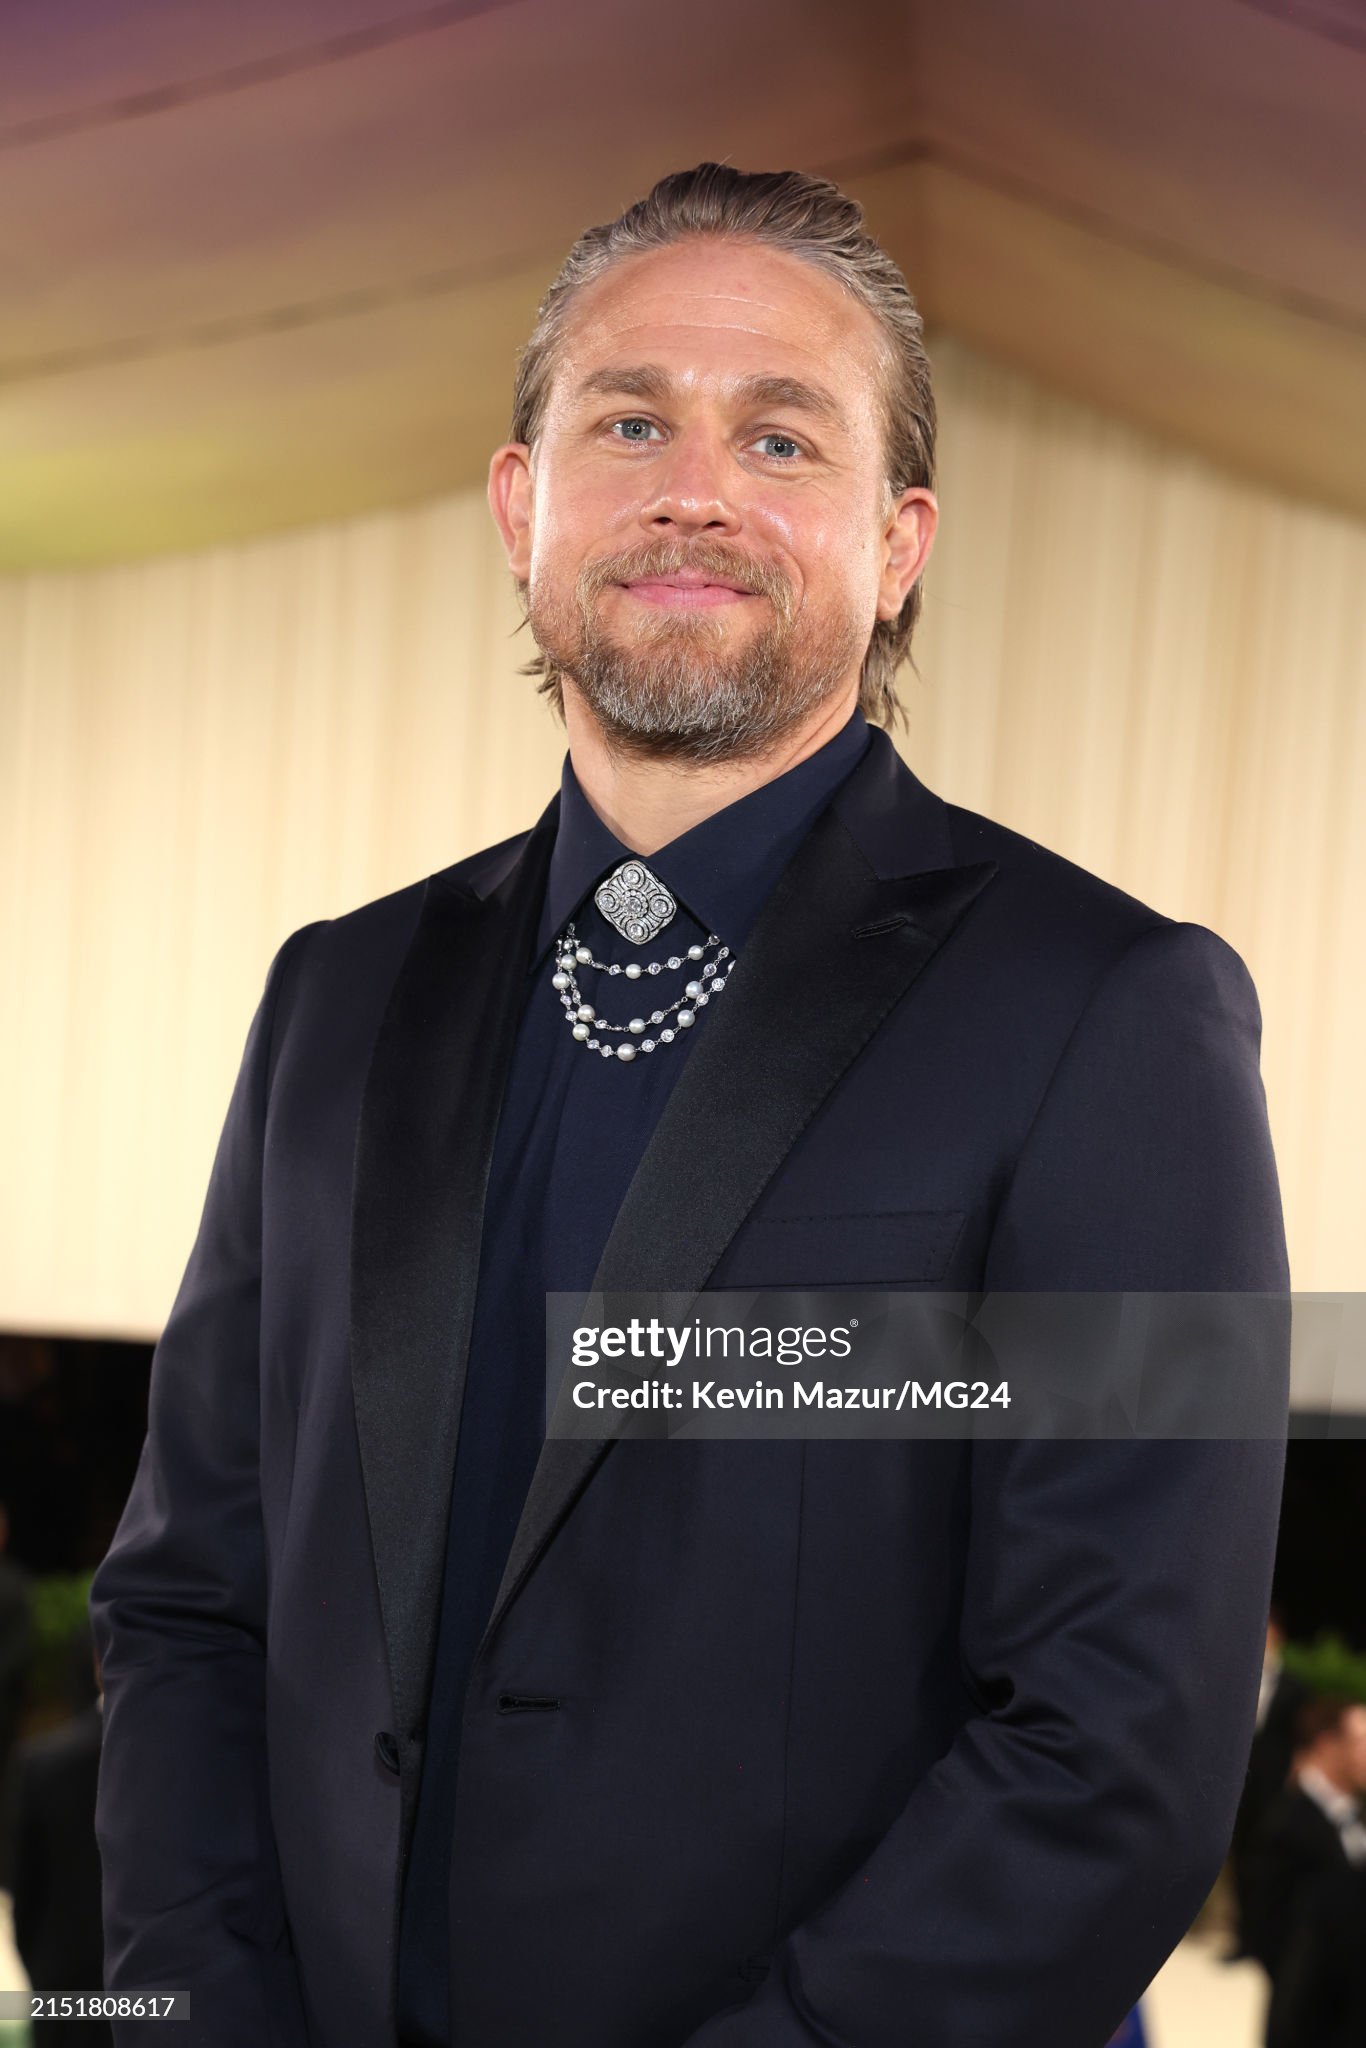 gettyimages-2151808617-2048x2048.jpg